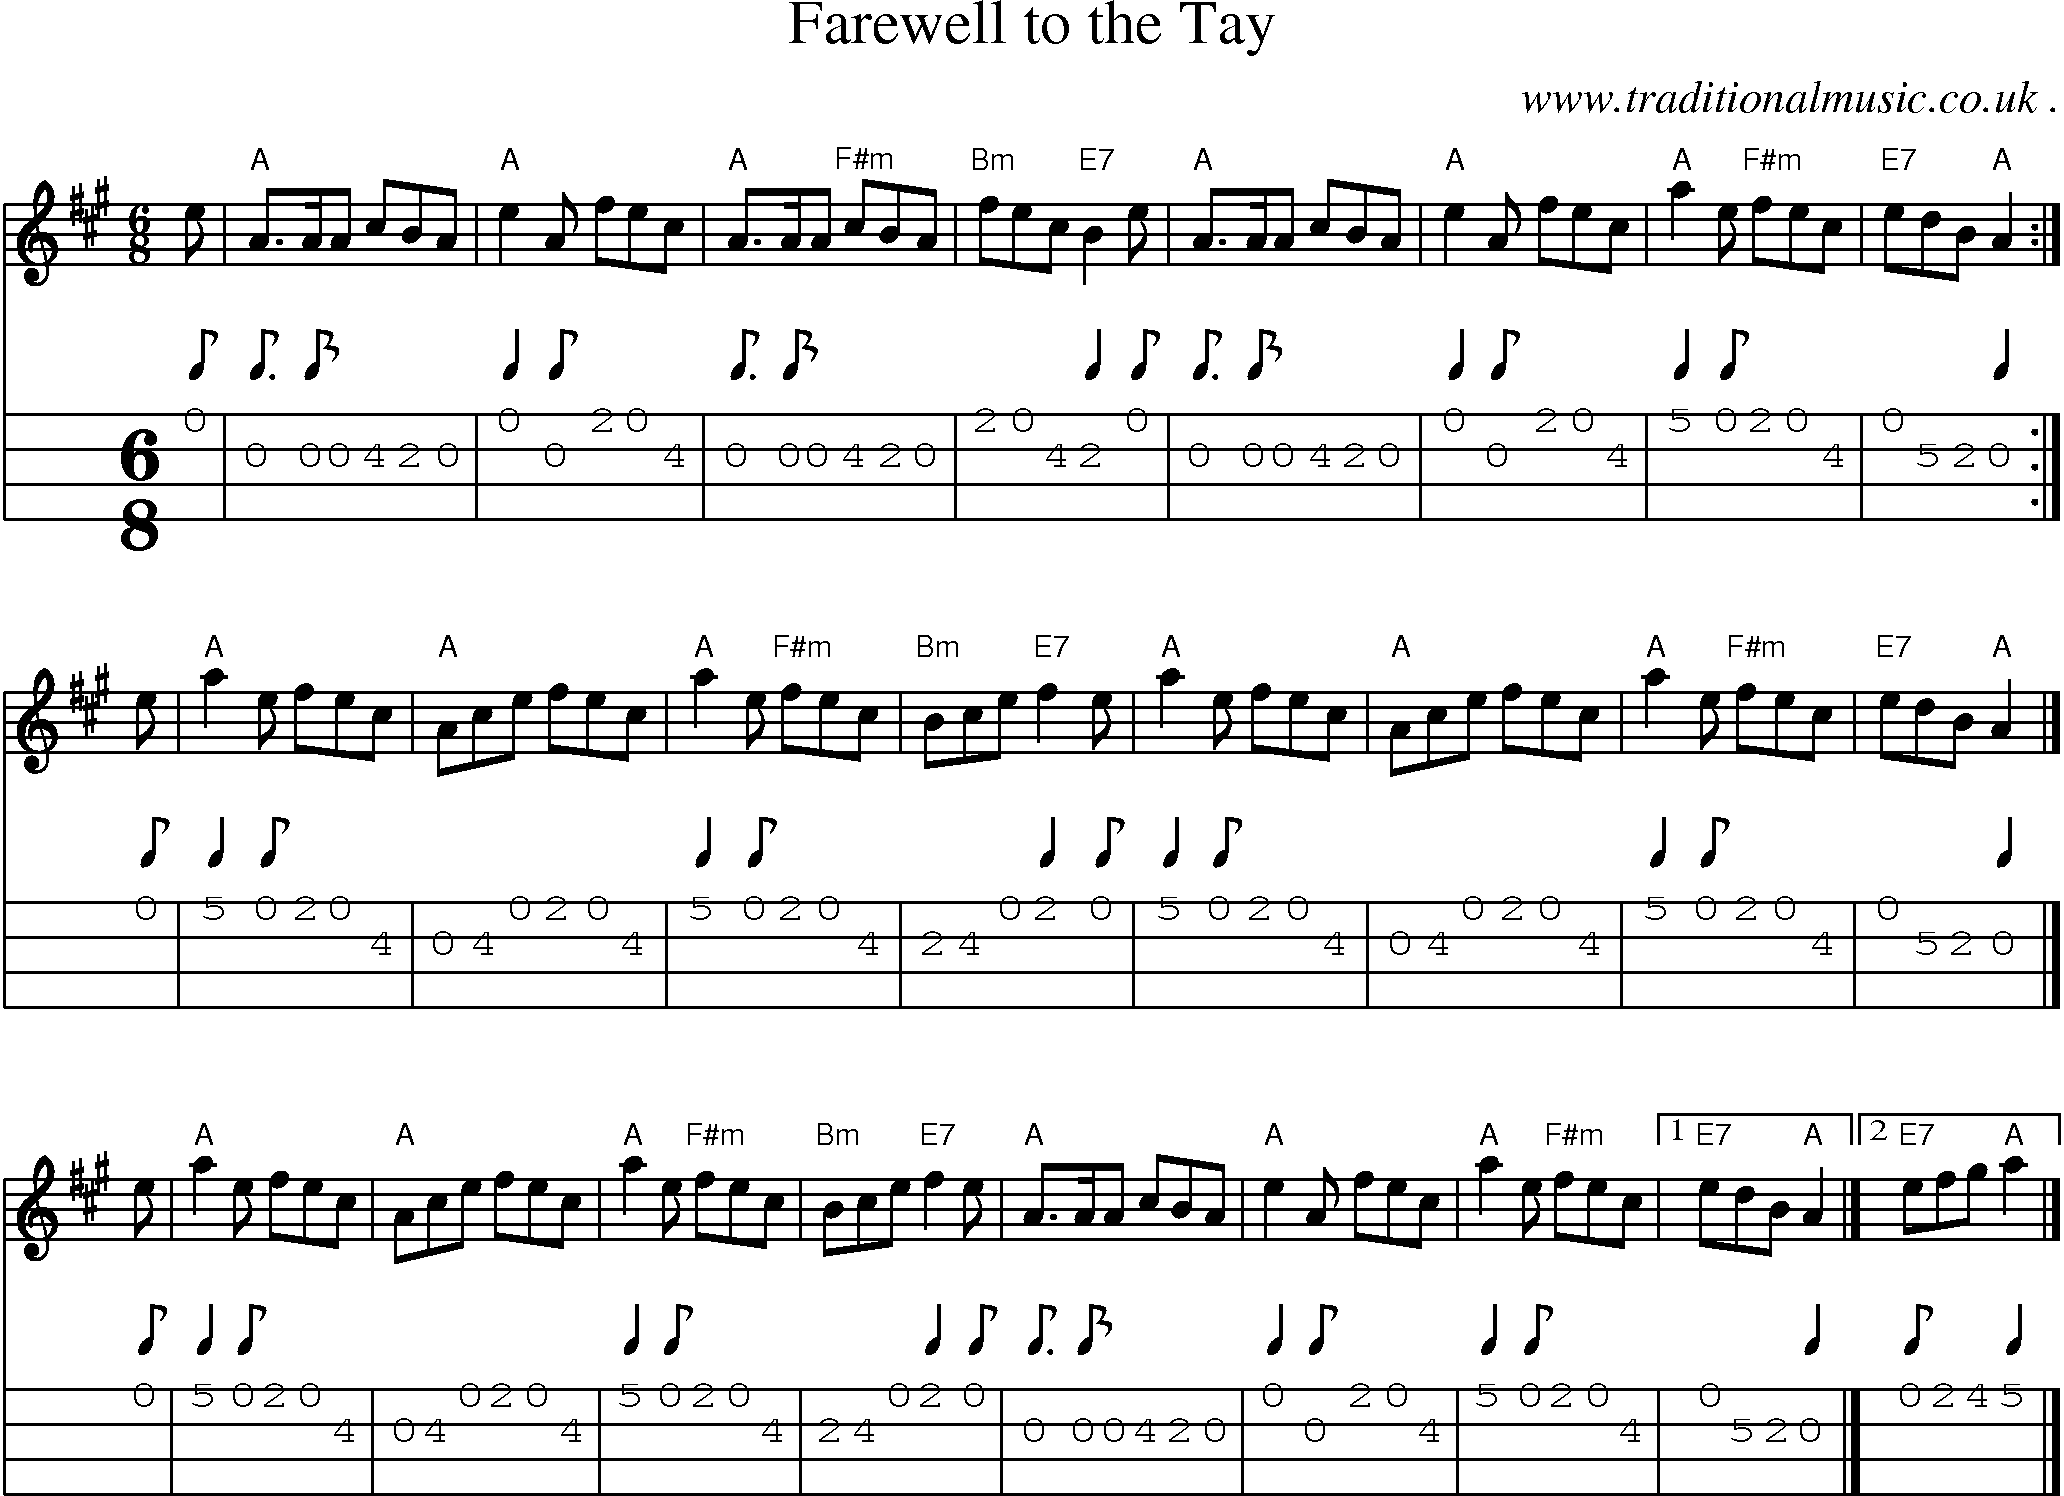 Sheet-music  score, Chords and Mandolin Tabs for Farewell To The Tay